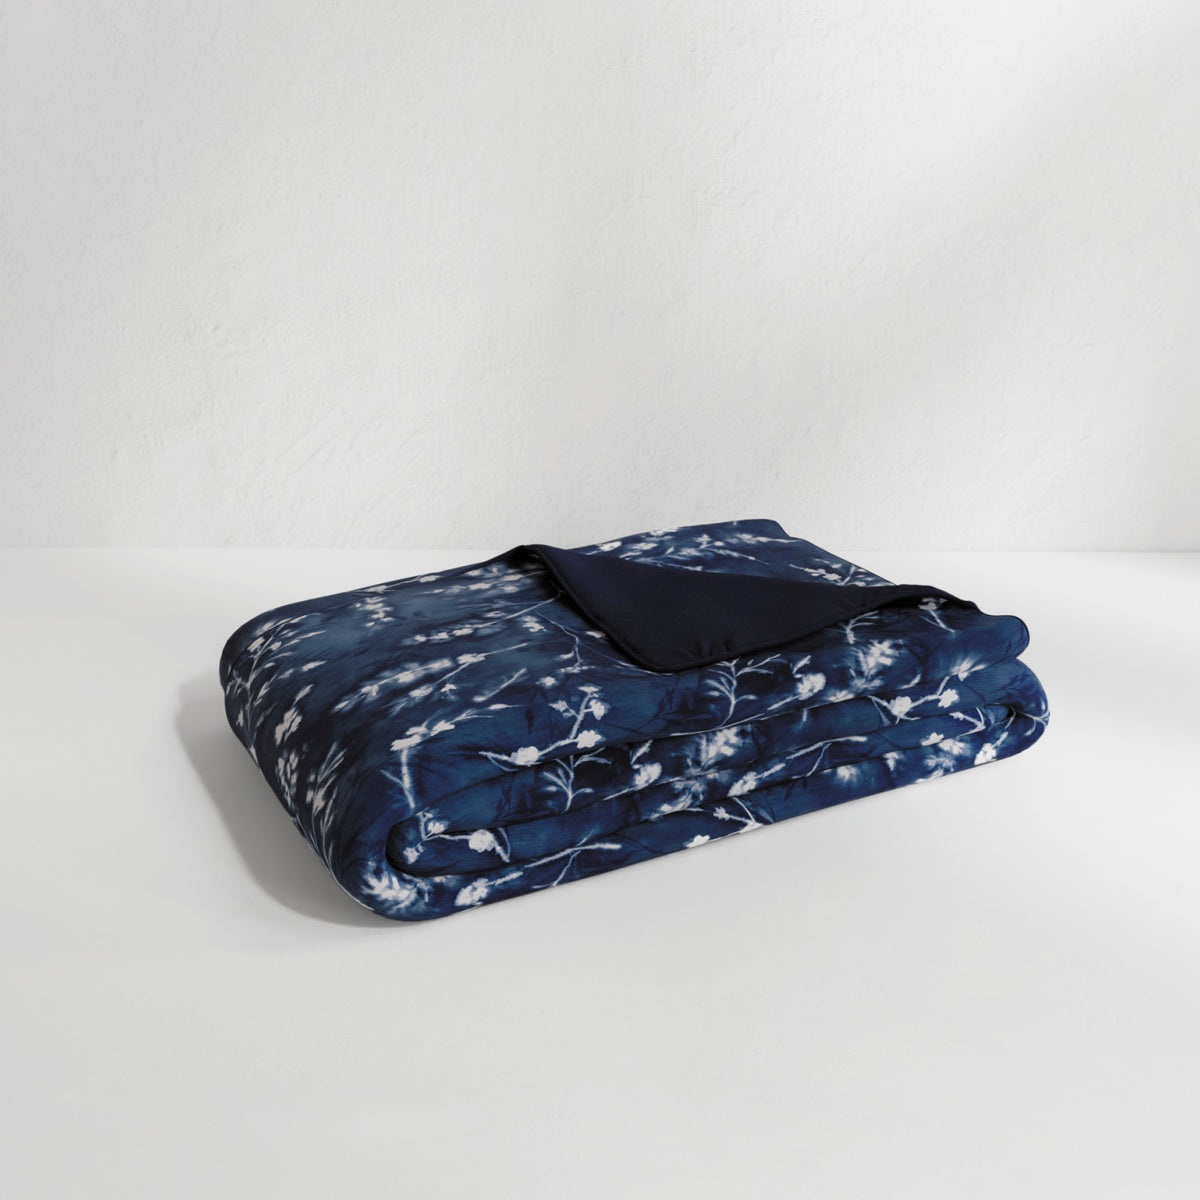 Image of the Floral Midnight Duvet Cover + Cooling neatly folded with the floral side facing up and the back right corner folded over to show the reversible plain Midnight side